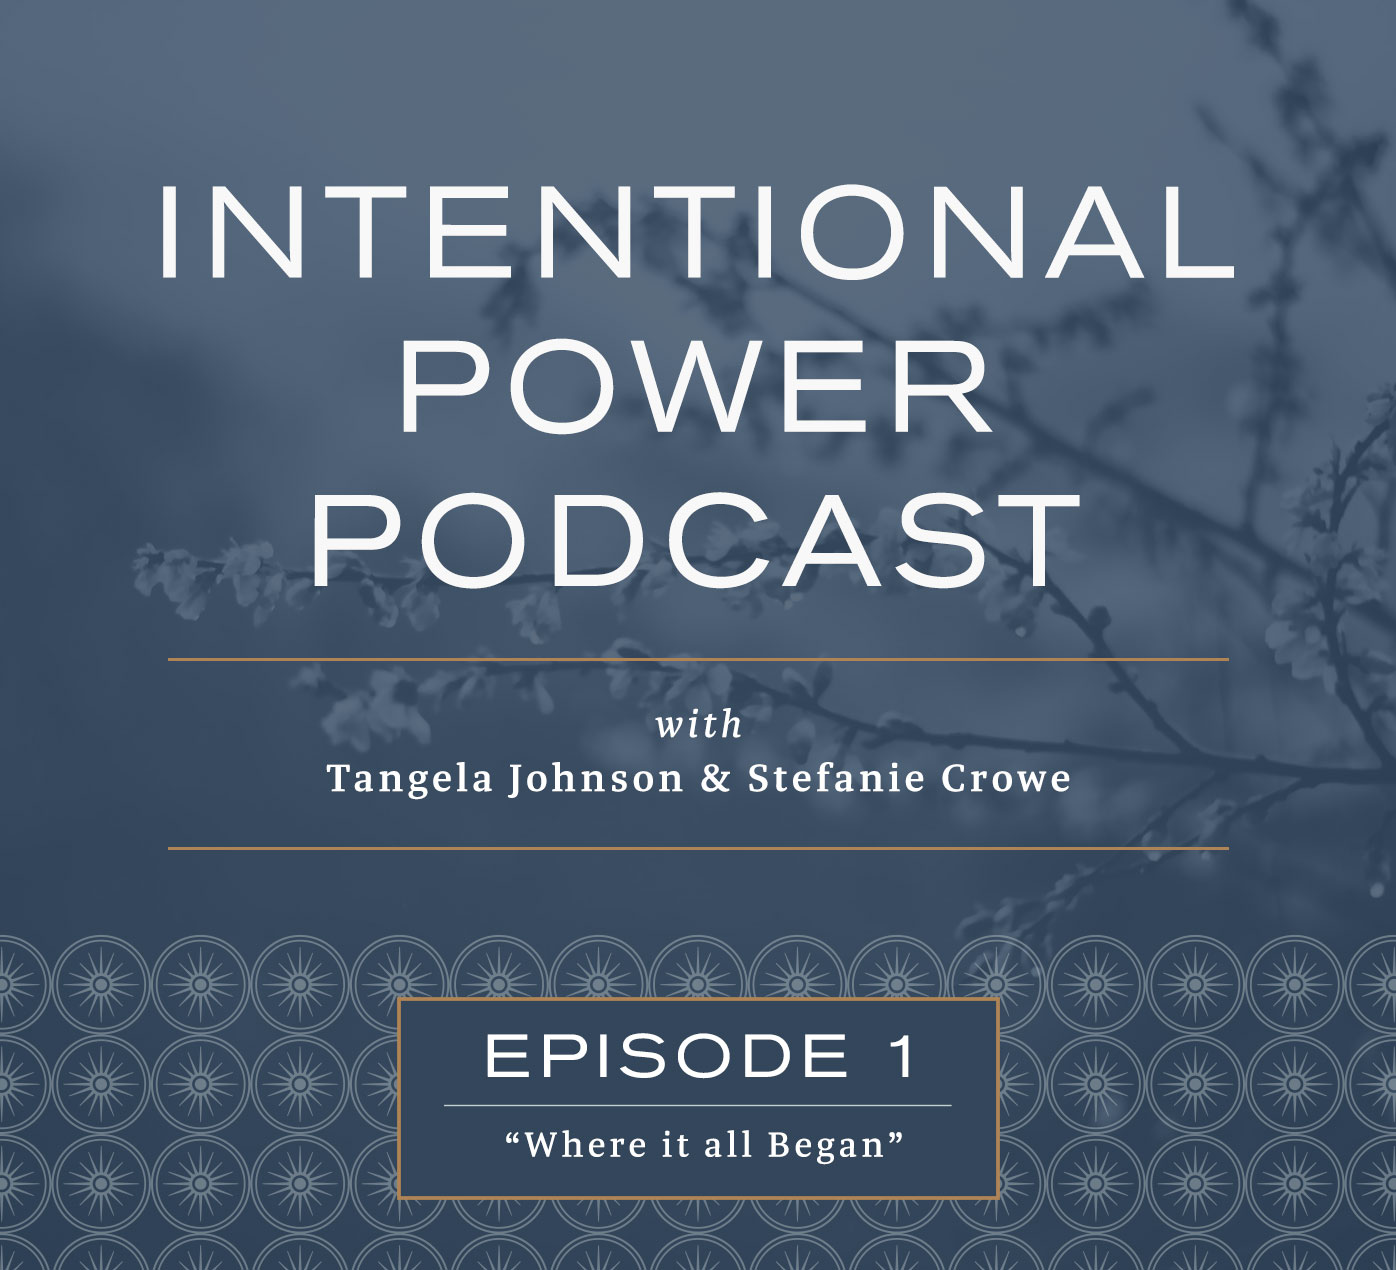 Intentional Power Podcast - Episode 1: Where it all Began